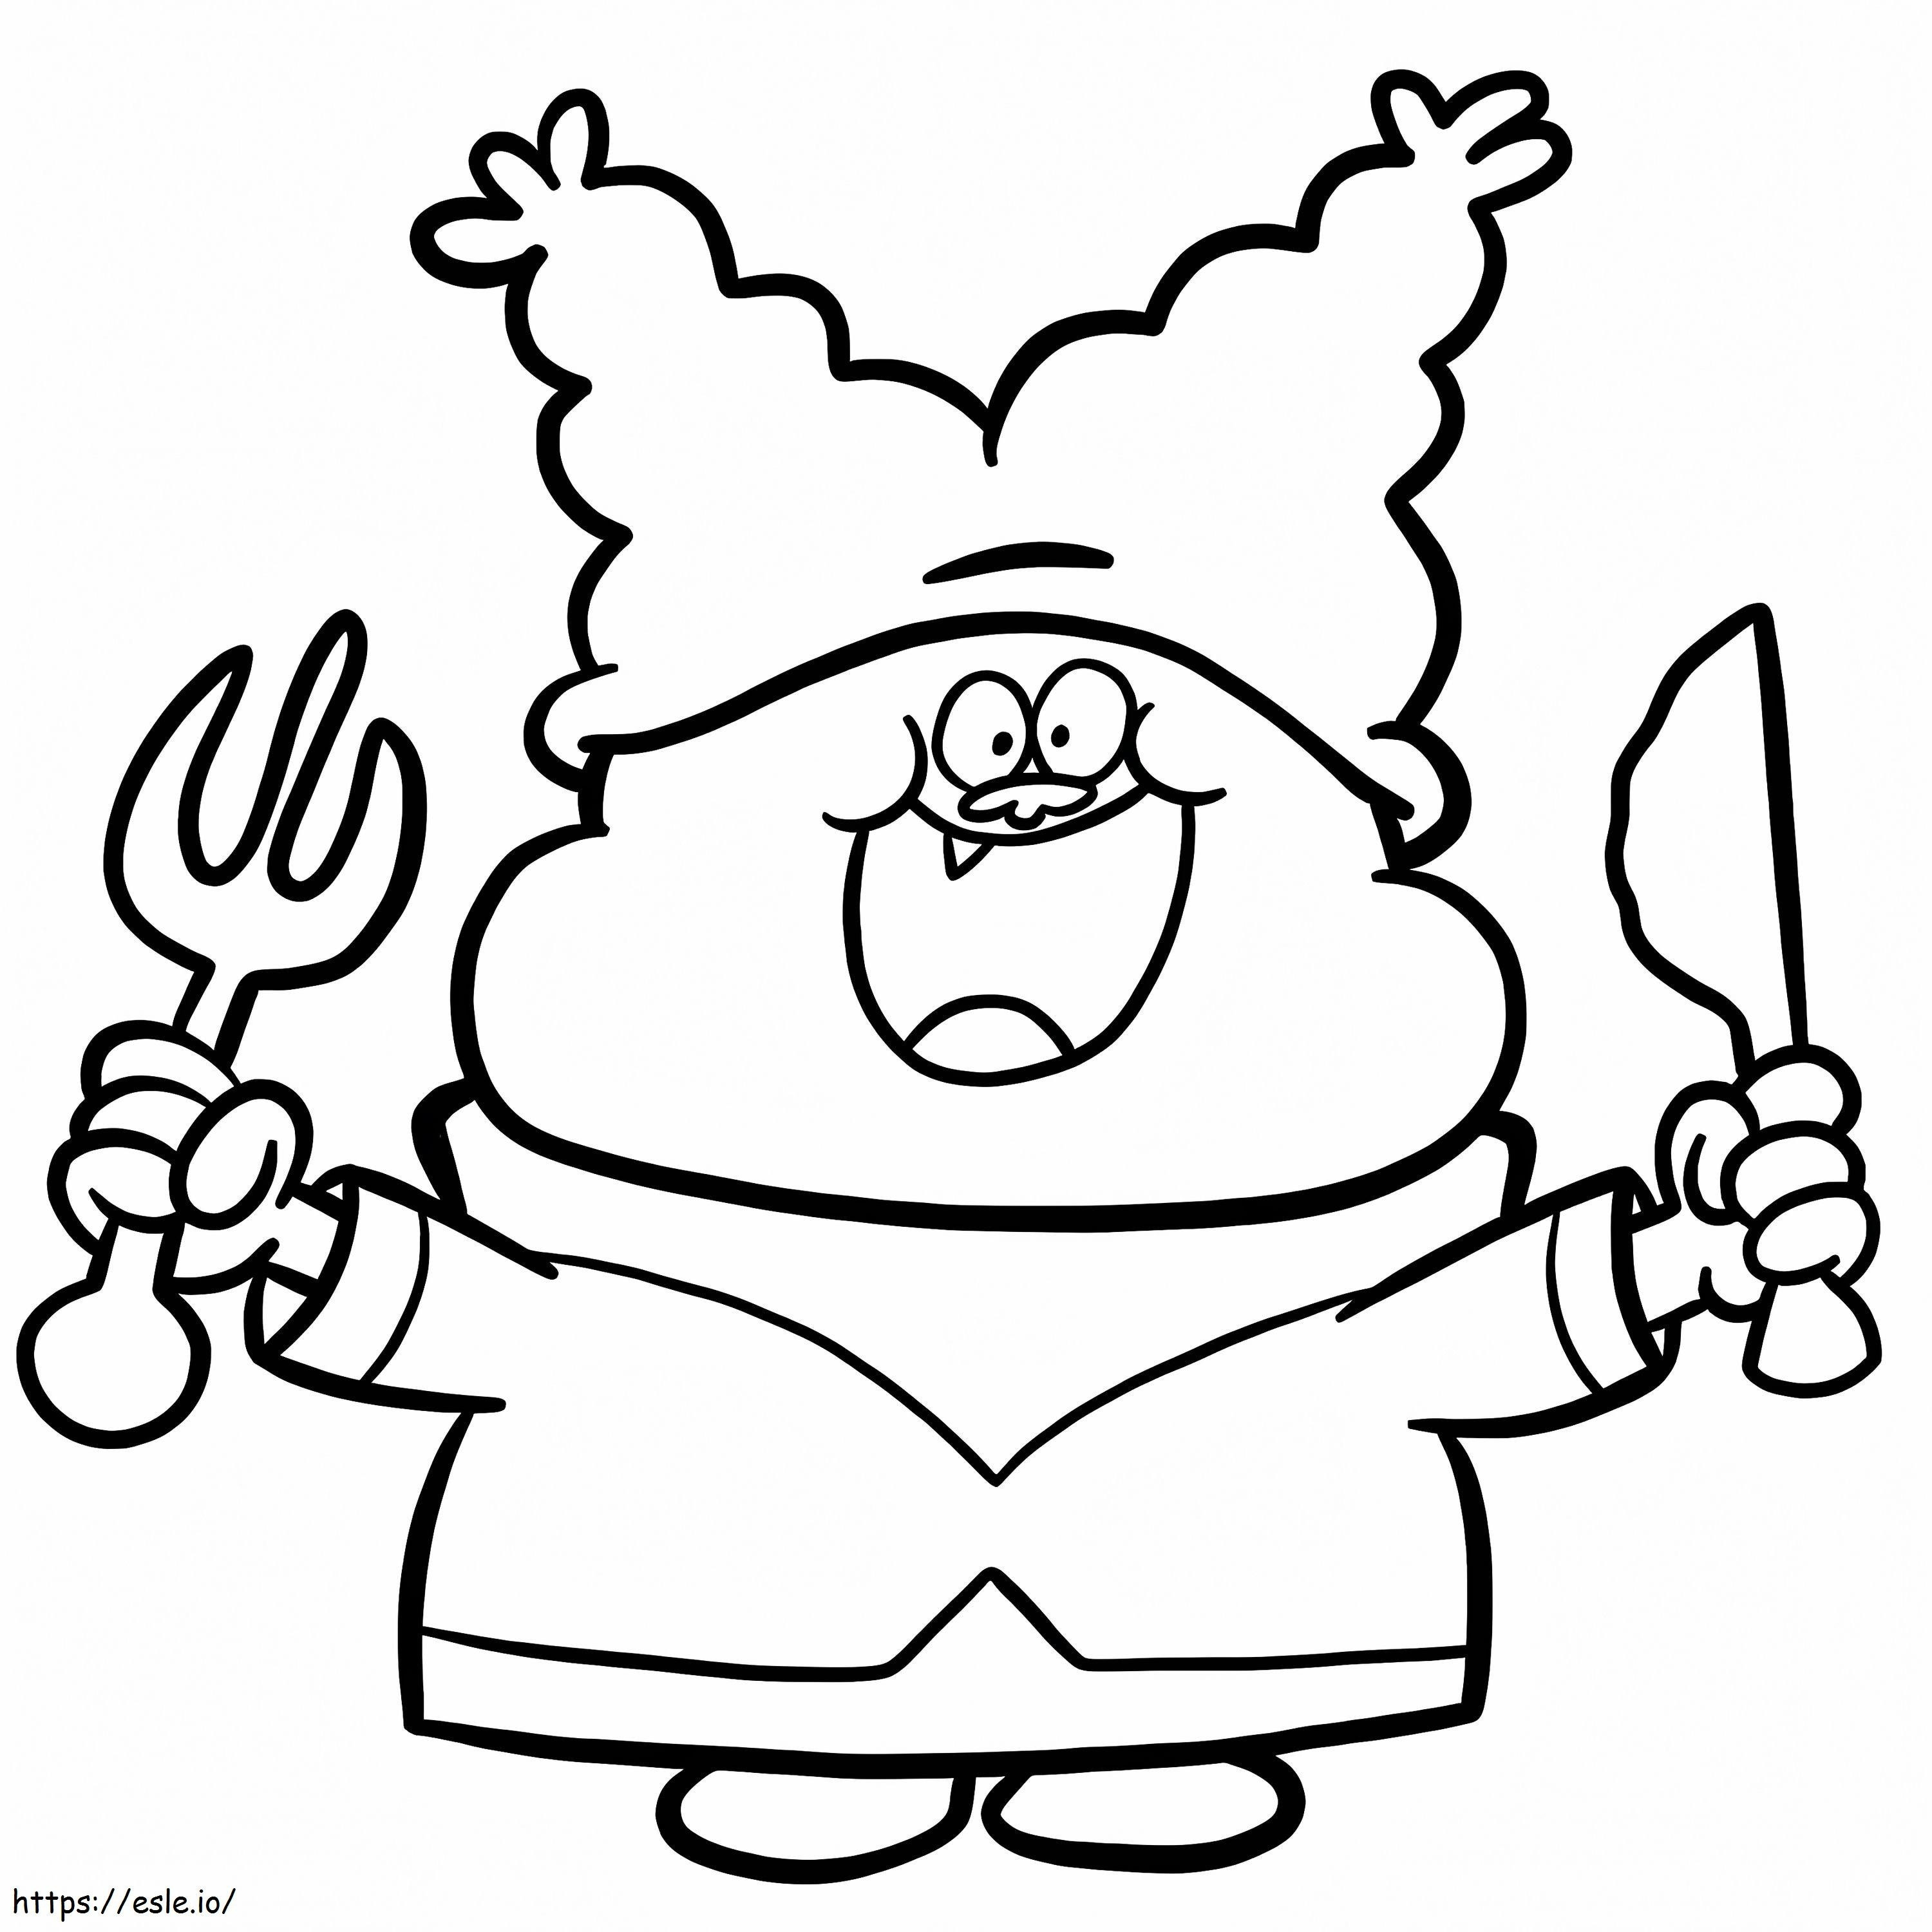 Chowder coloring page